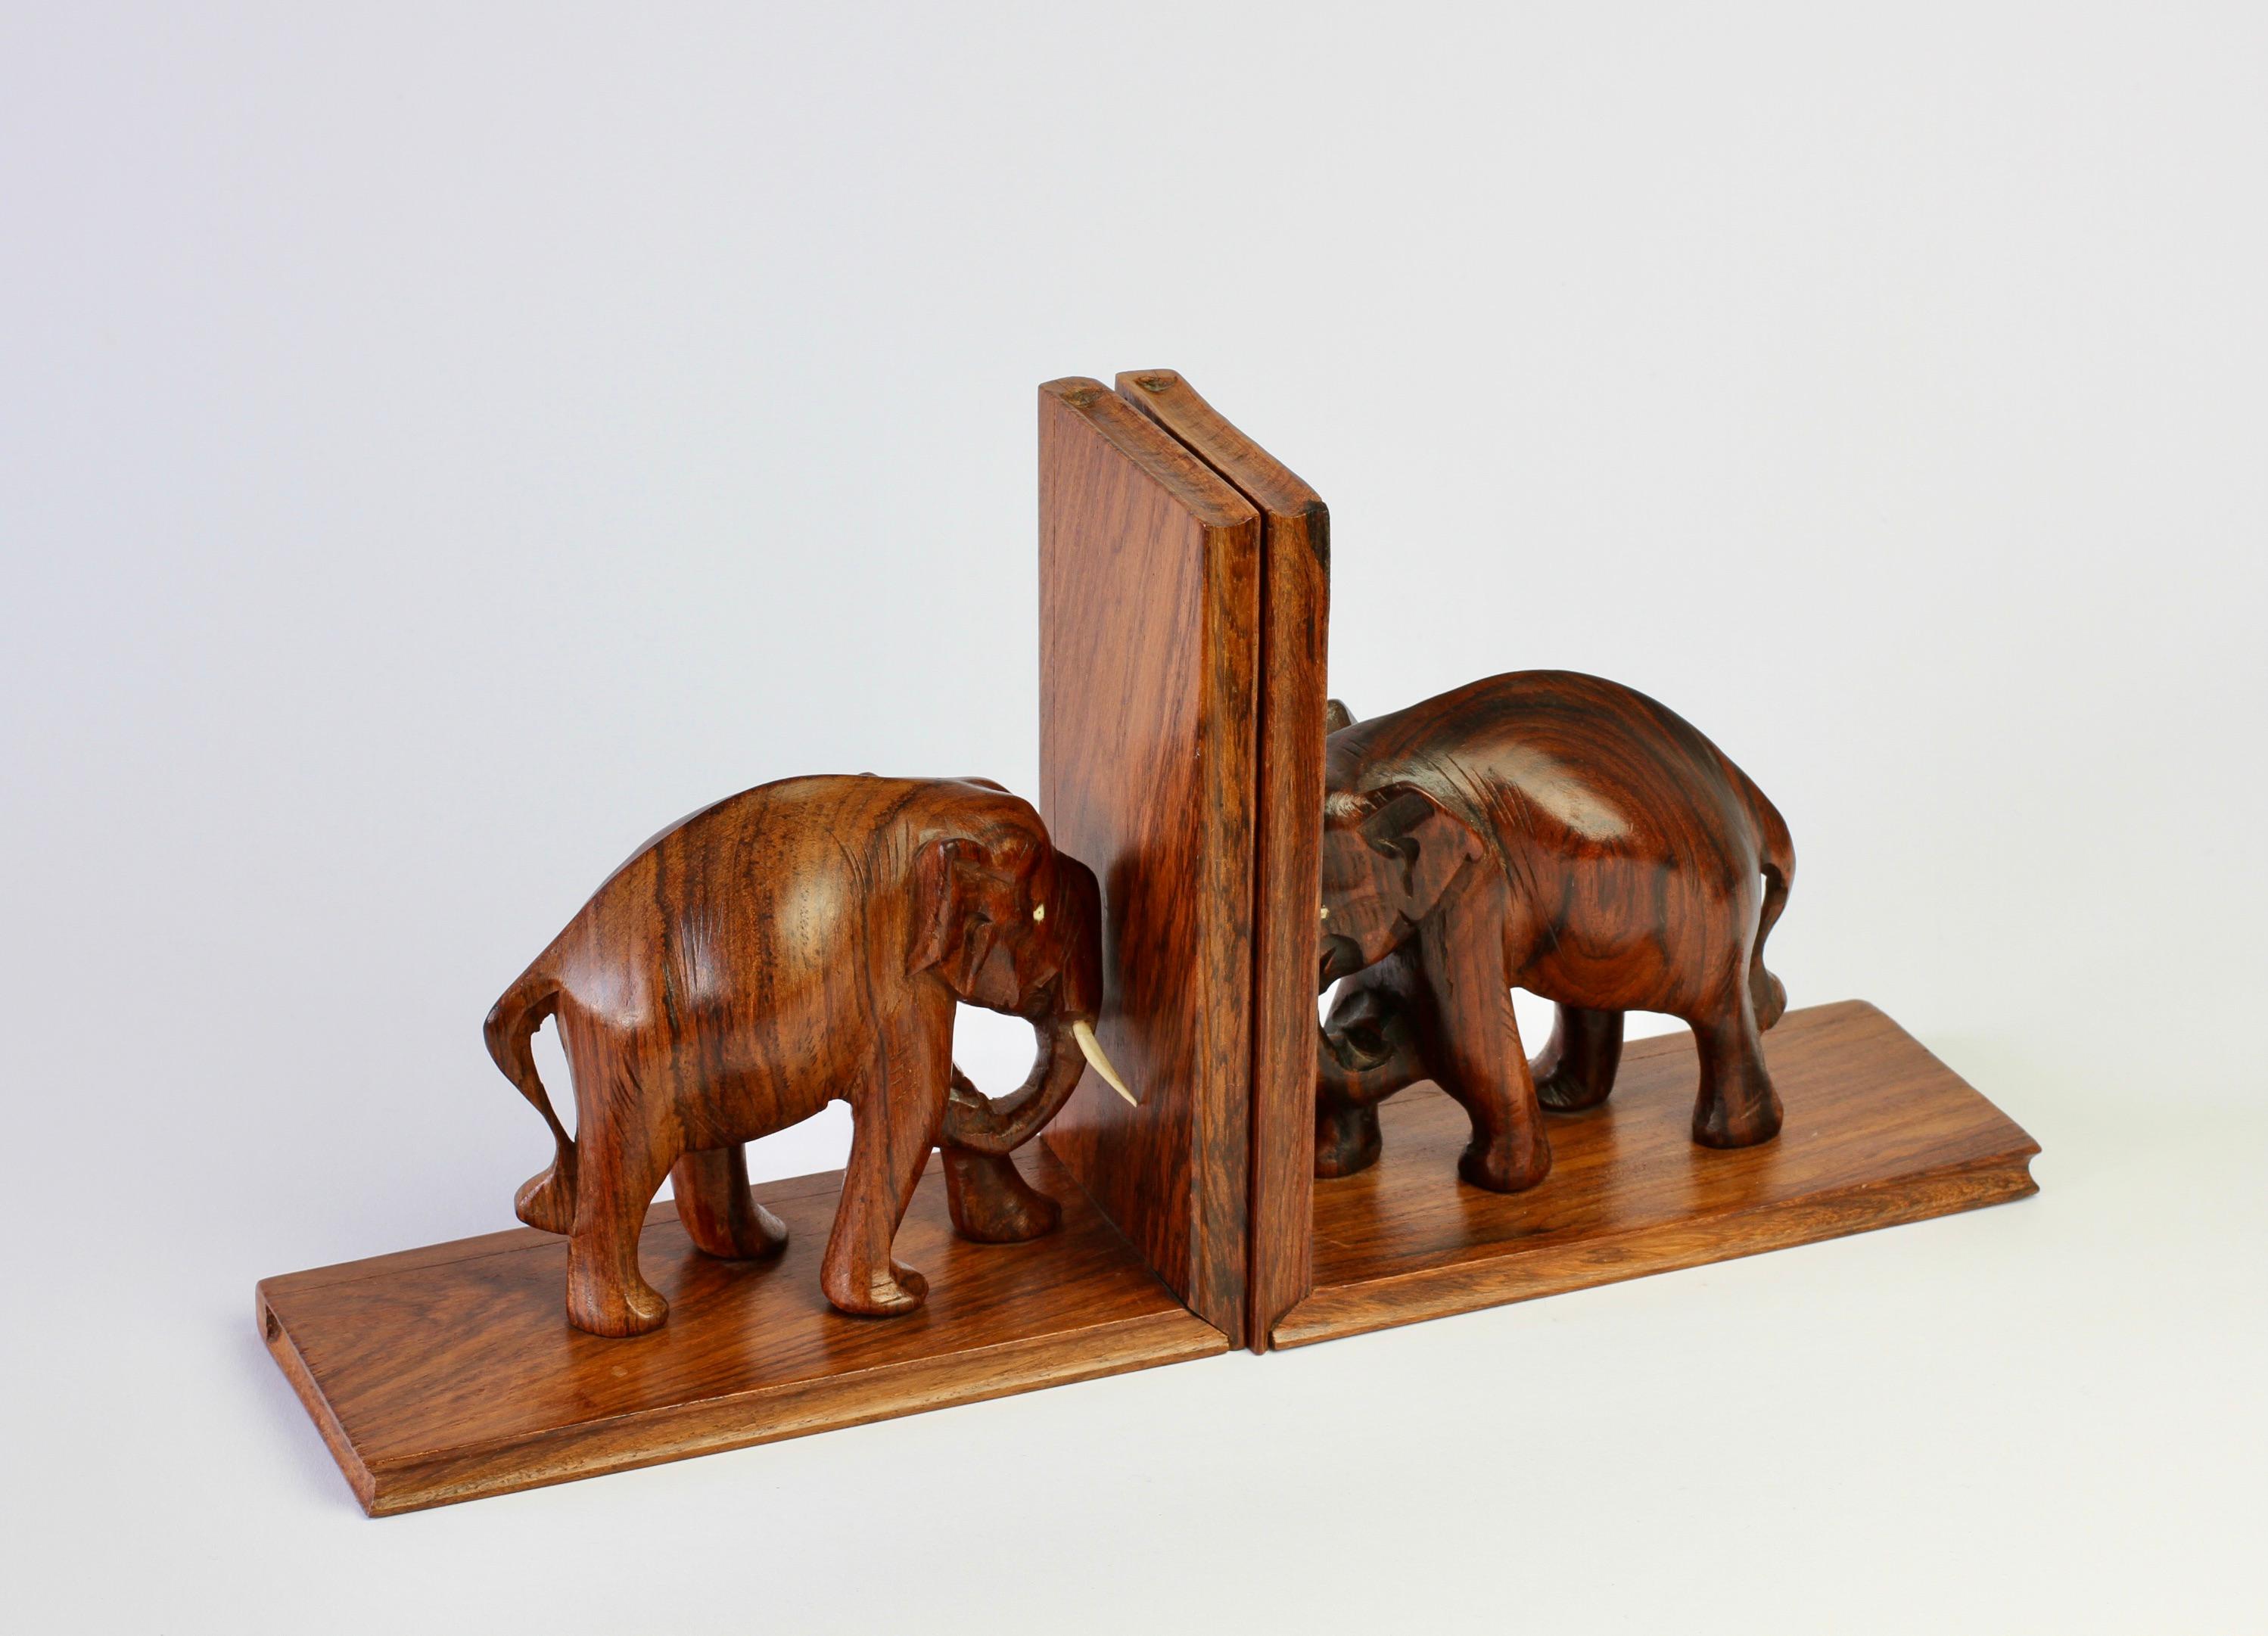 Unknown Hand Carved Wooden Book Ends with Elephant Sculptures / Figures, circa 1960s